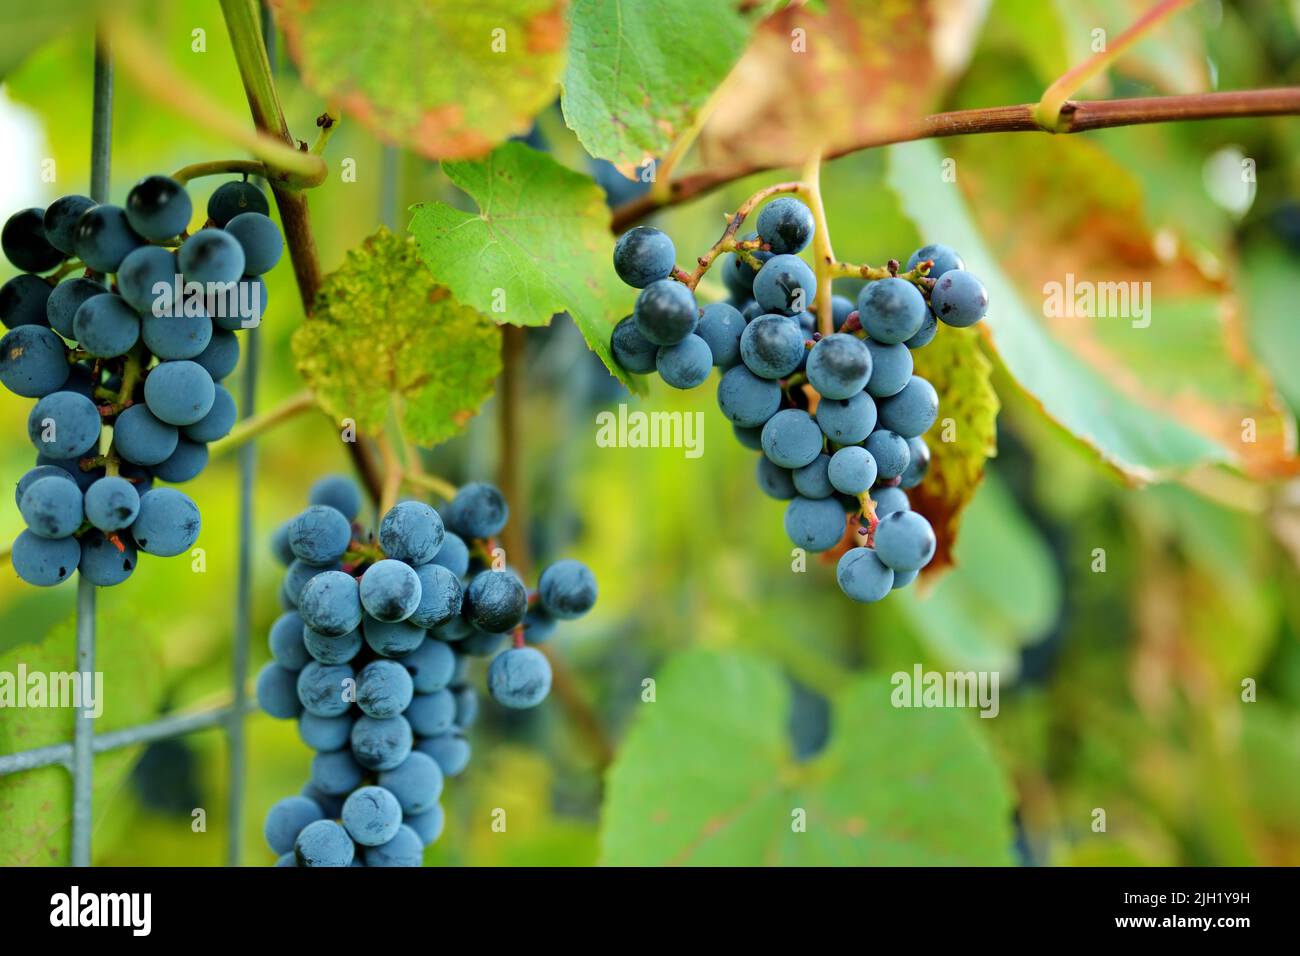 https://c8.alamy.com/comp/2JH1Y9H/small-bunch-of-grapes-at-sunset-in-autumn-harvest-ripe-grapes-in-fall-2JH1Y9H.jpg